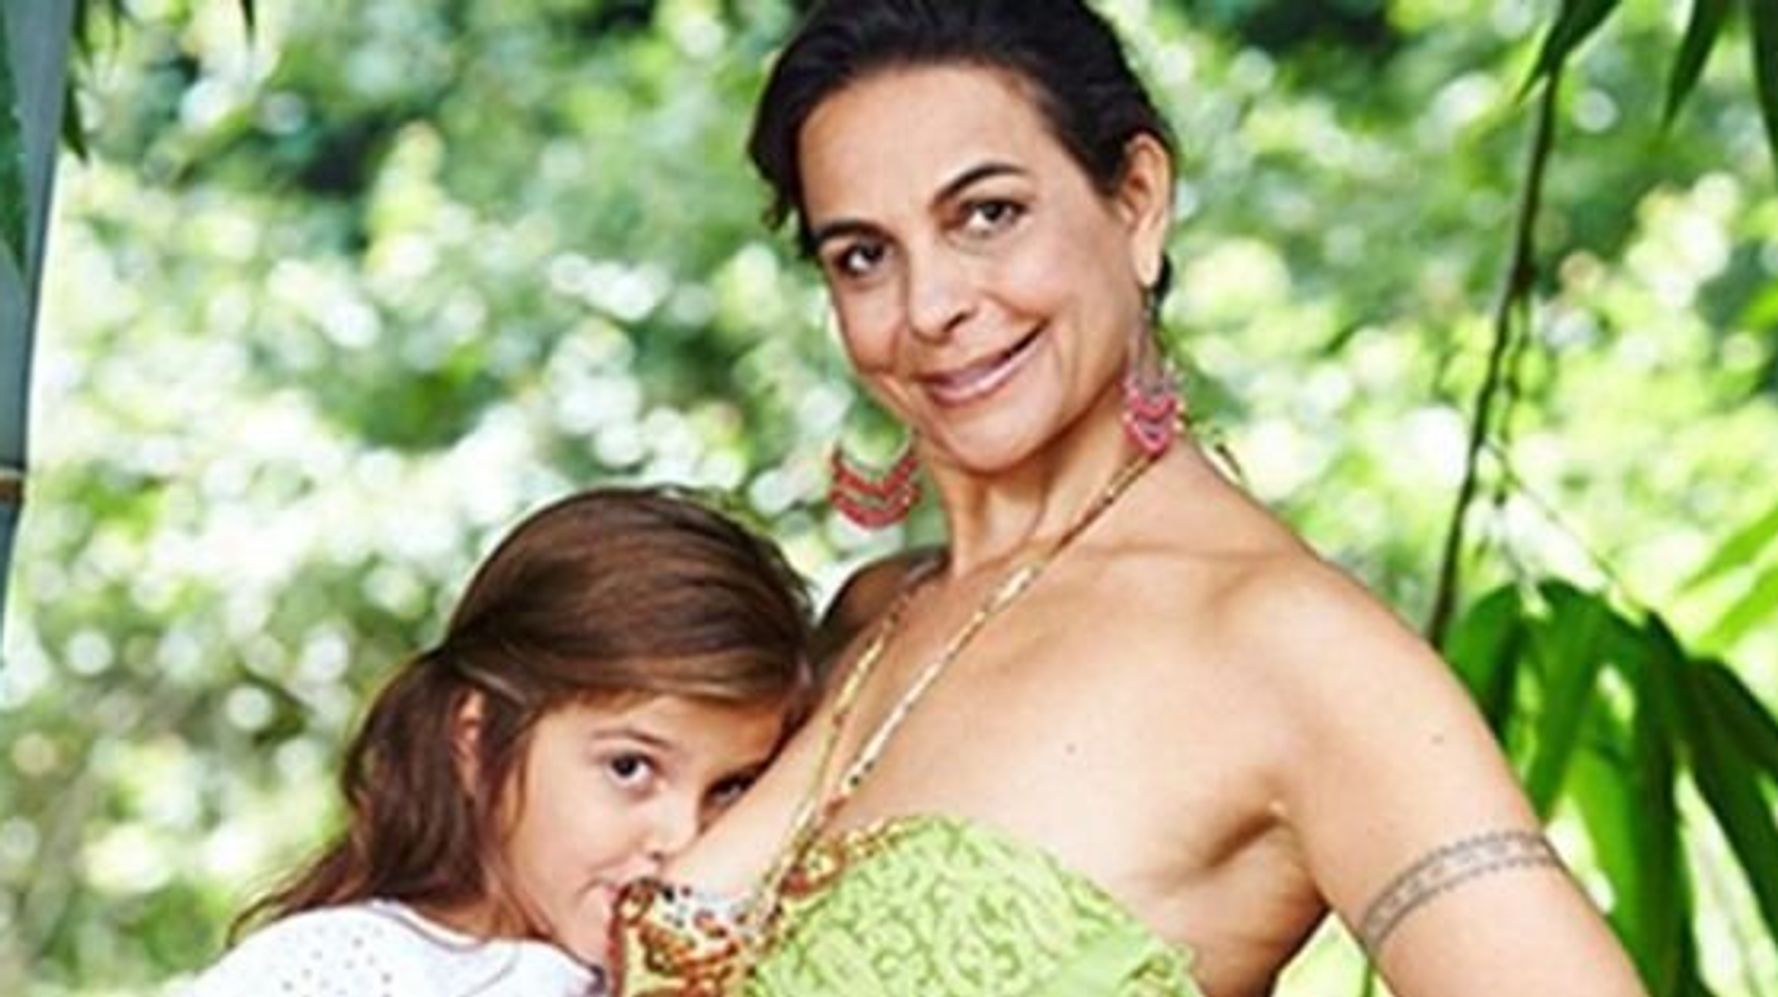 Mom Maha Al Musa Wont Stop Breastfeeding Until Her 6-Year-Old Is Ready ... hq nude picture